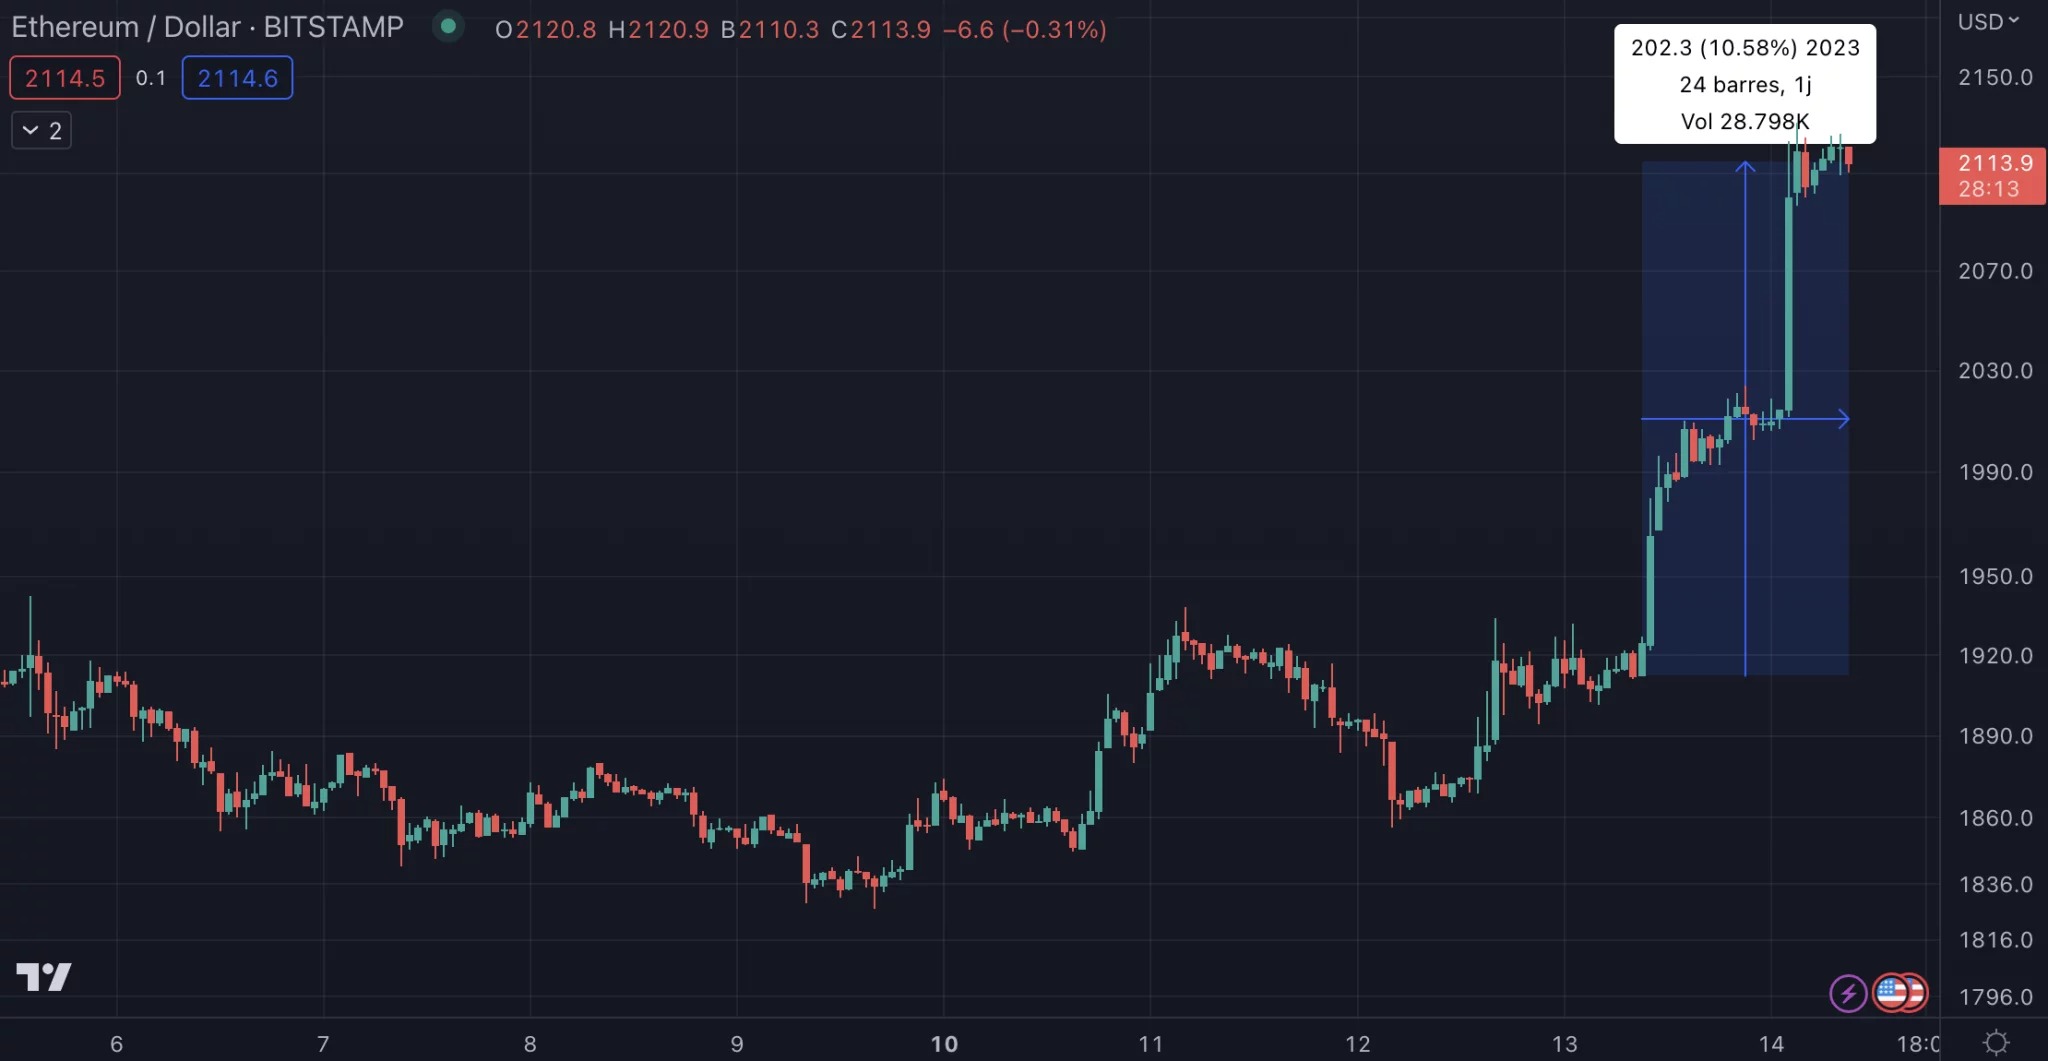 Ether (ETH) price rise over the last 24 hours